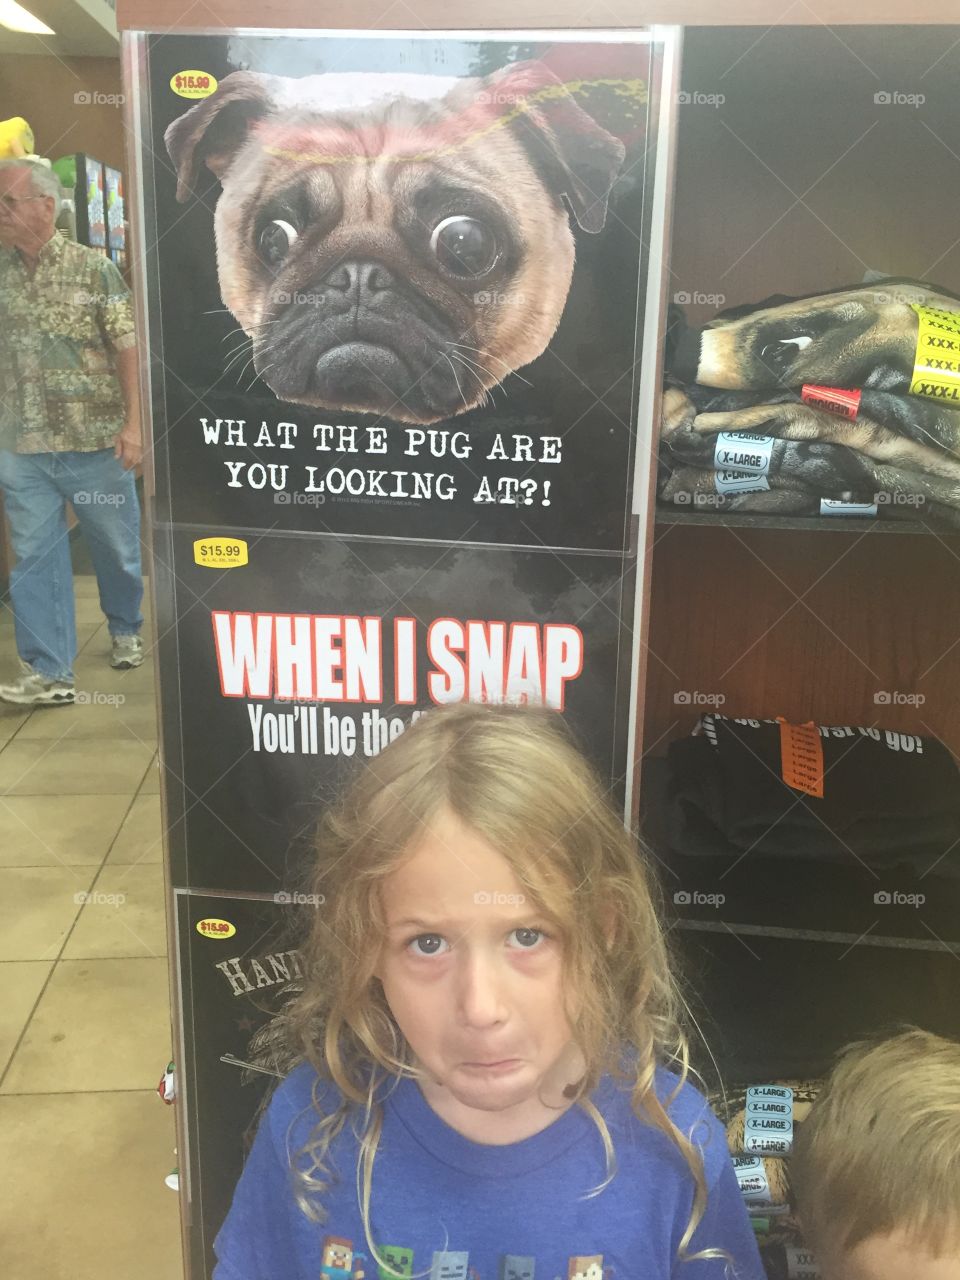 Small girl standing near poster